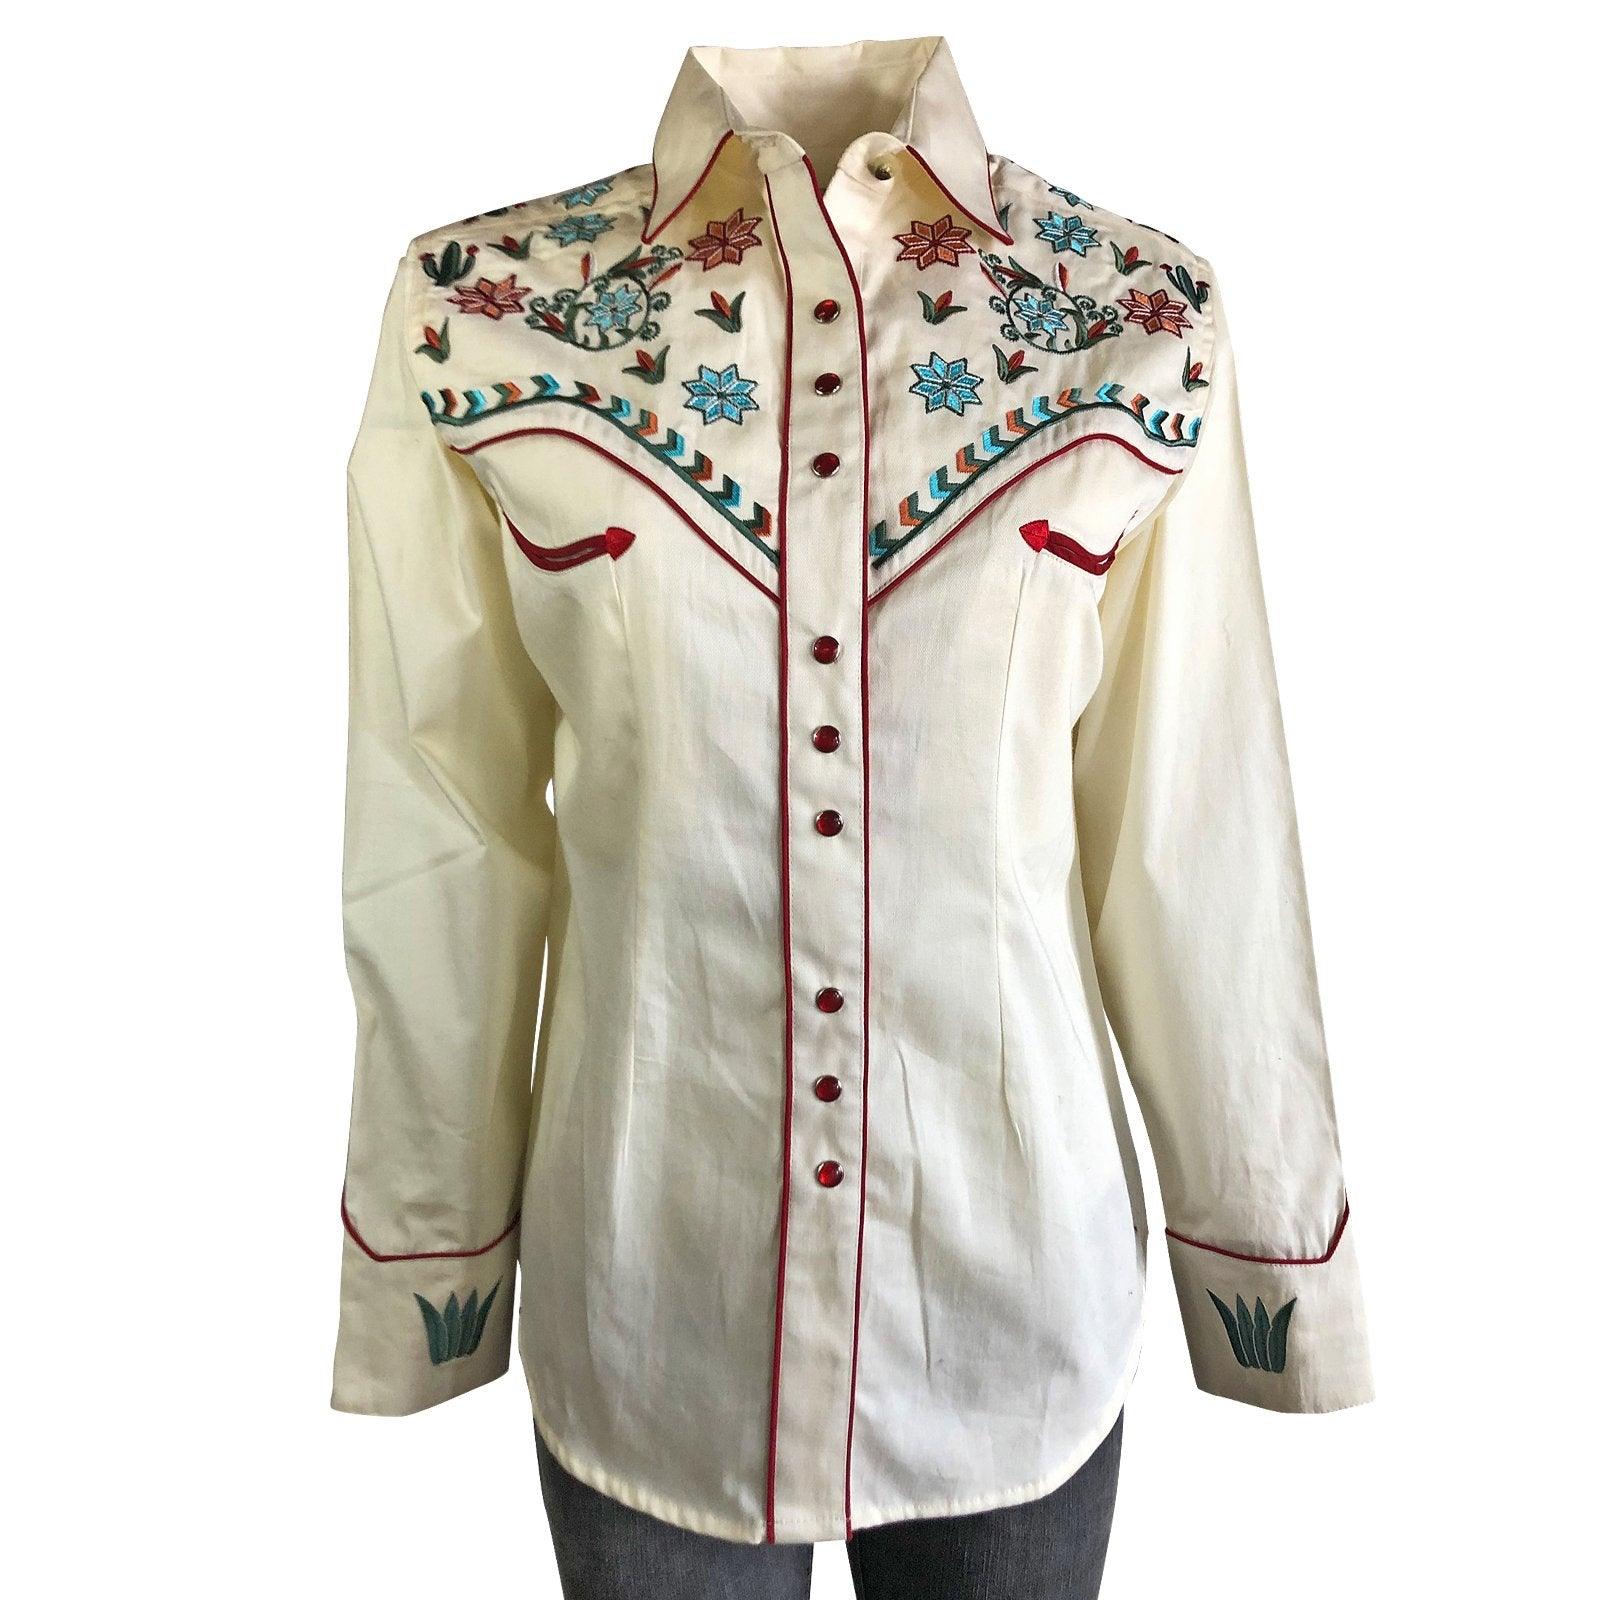 Women's Ivory Agave Cactus Floral Embroidery Western Shirt - Flyclothing LLC